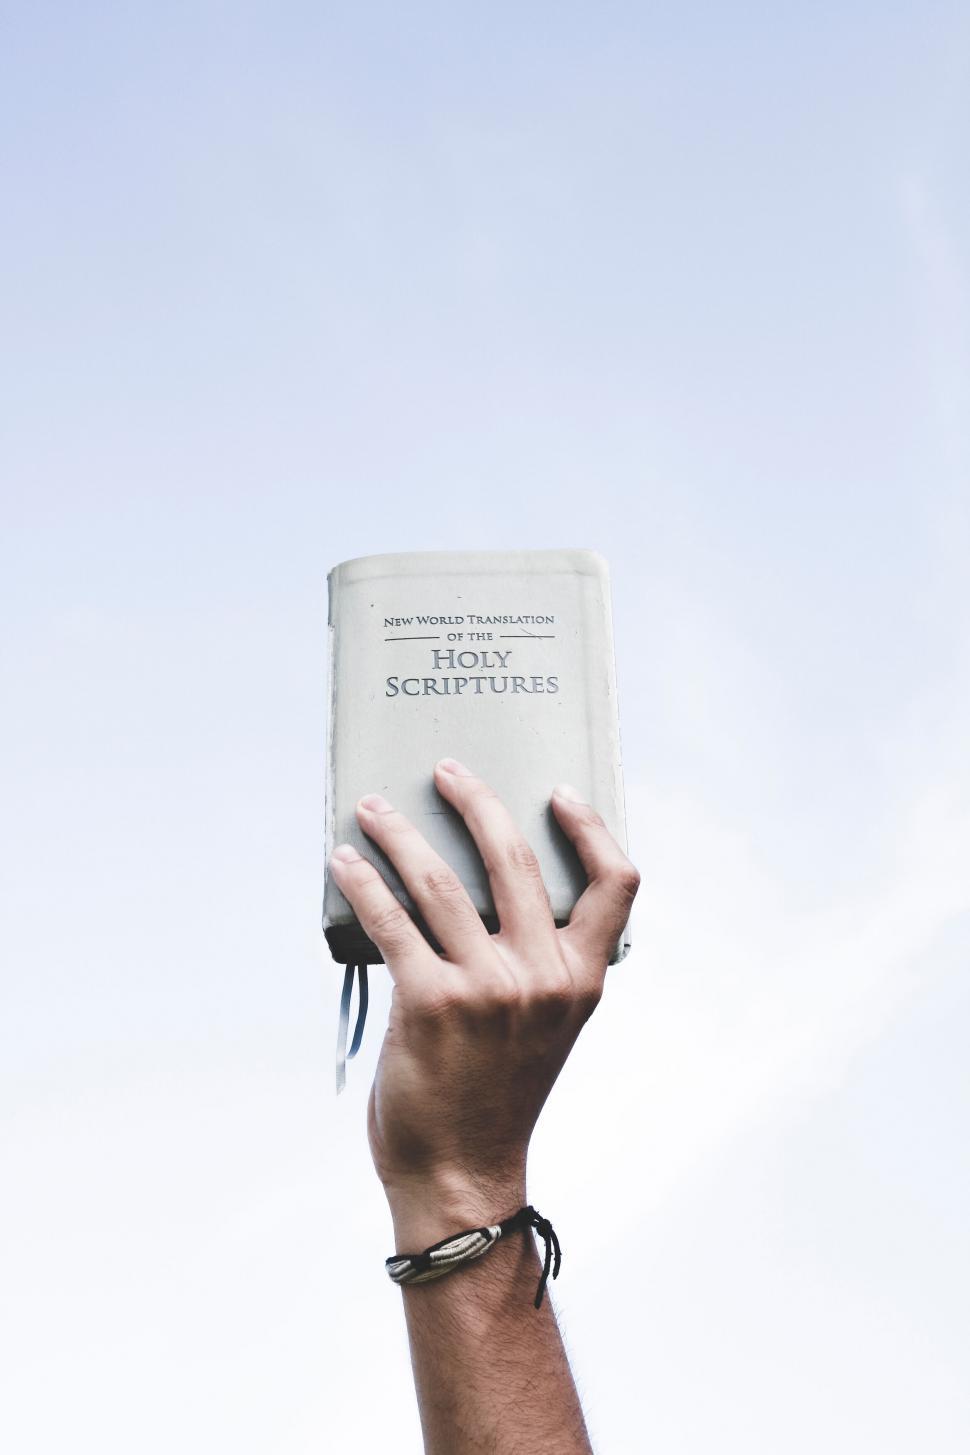 Free Image of Hand Holding a Holy Book Against Sky 